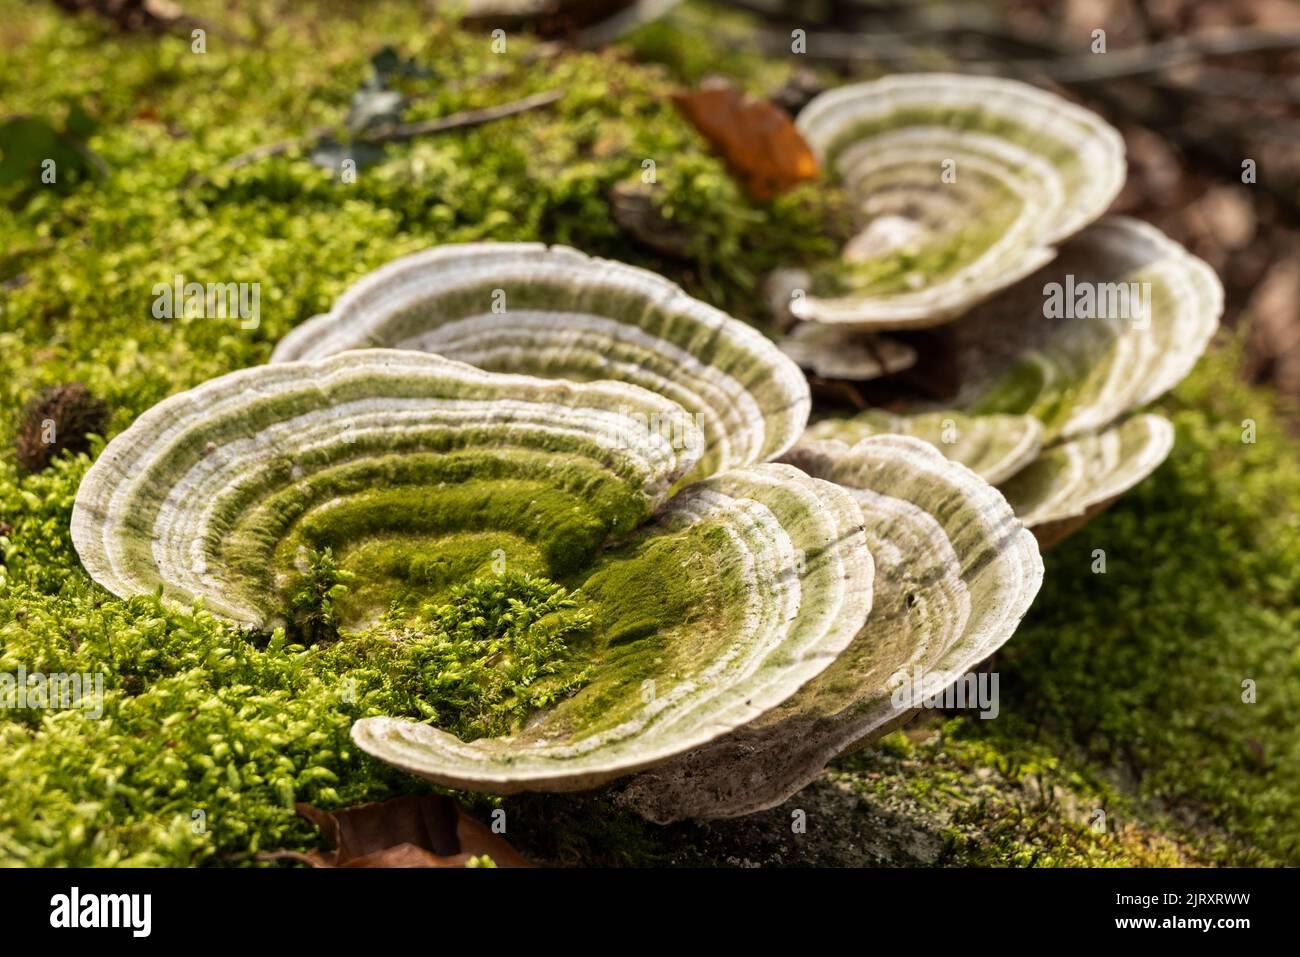 beautiful-close-up-of-a-lumpy-bracket-trametes-gibbosa-a-polypore-mushroom-growing-on-the-moss-covered-trunk-of-an-old-dead-tree-in-a-forest-2JRXRWW.jpg